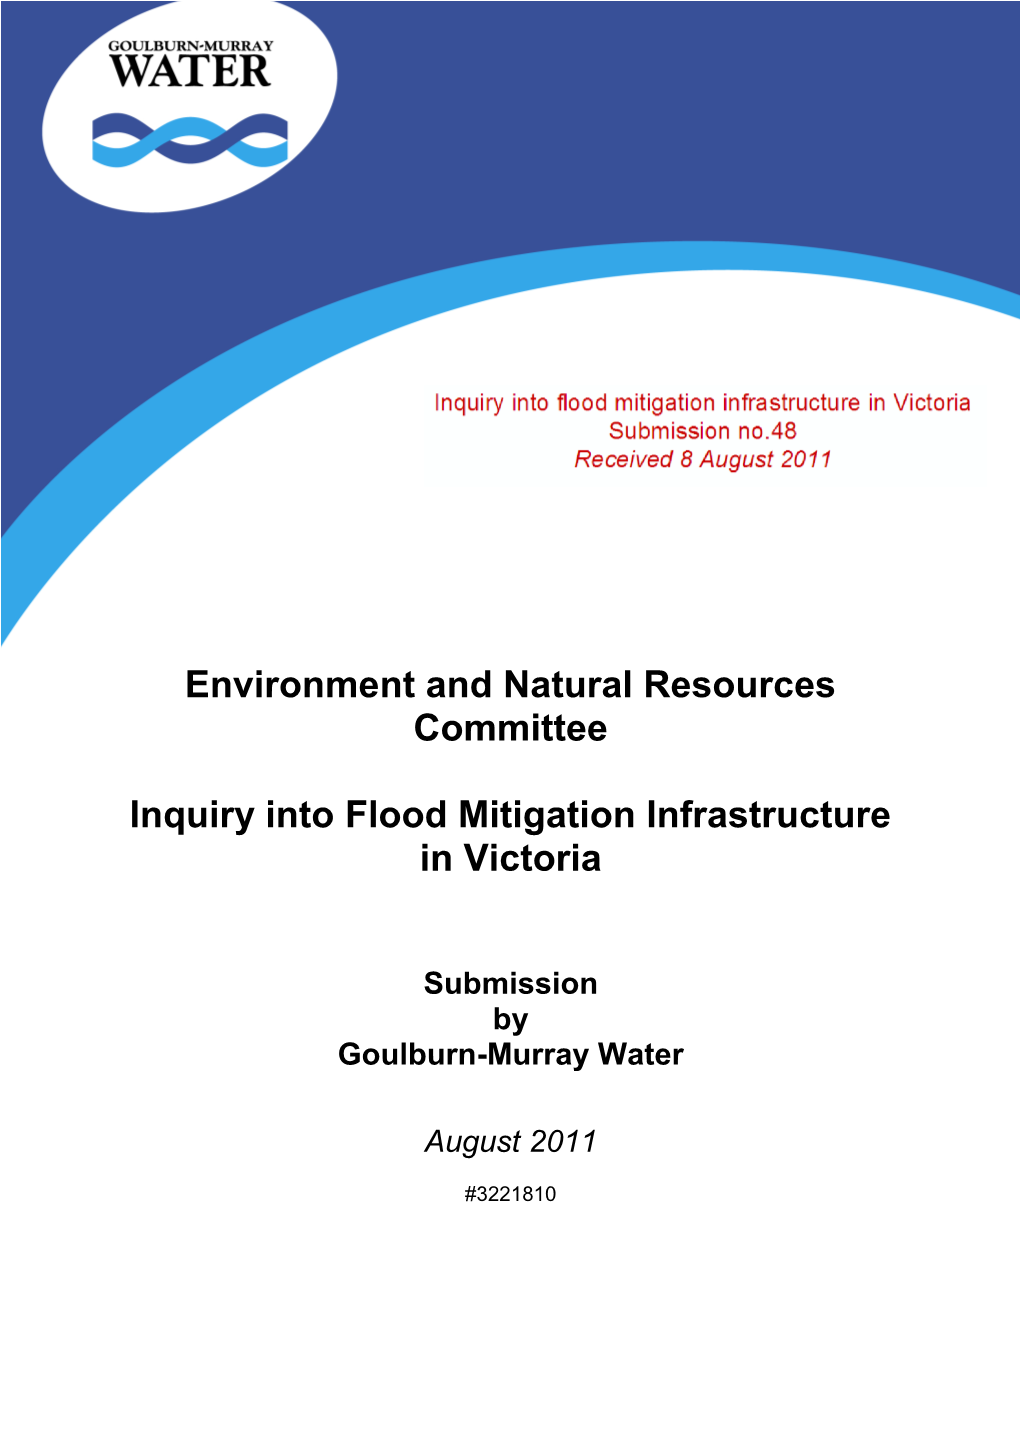 Environment and Natural Resources Committee Inquiry Into Flood Mitigation Infrastructure in Victoria